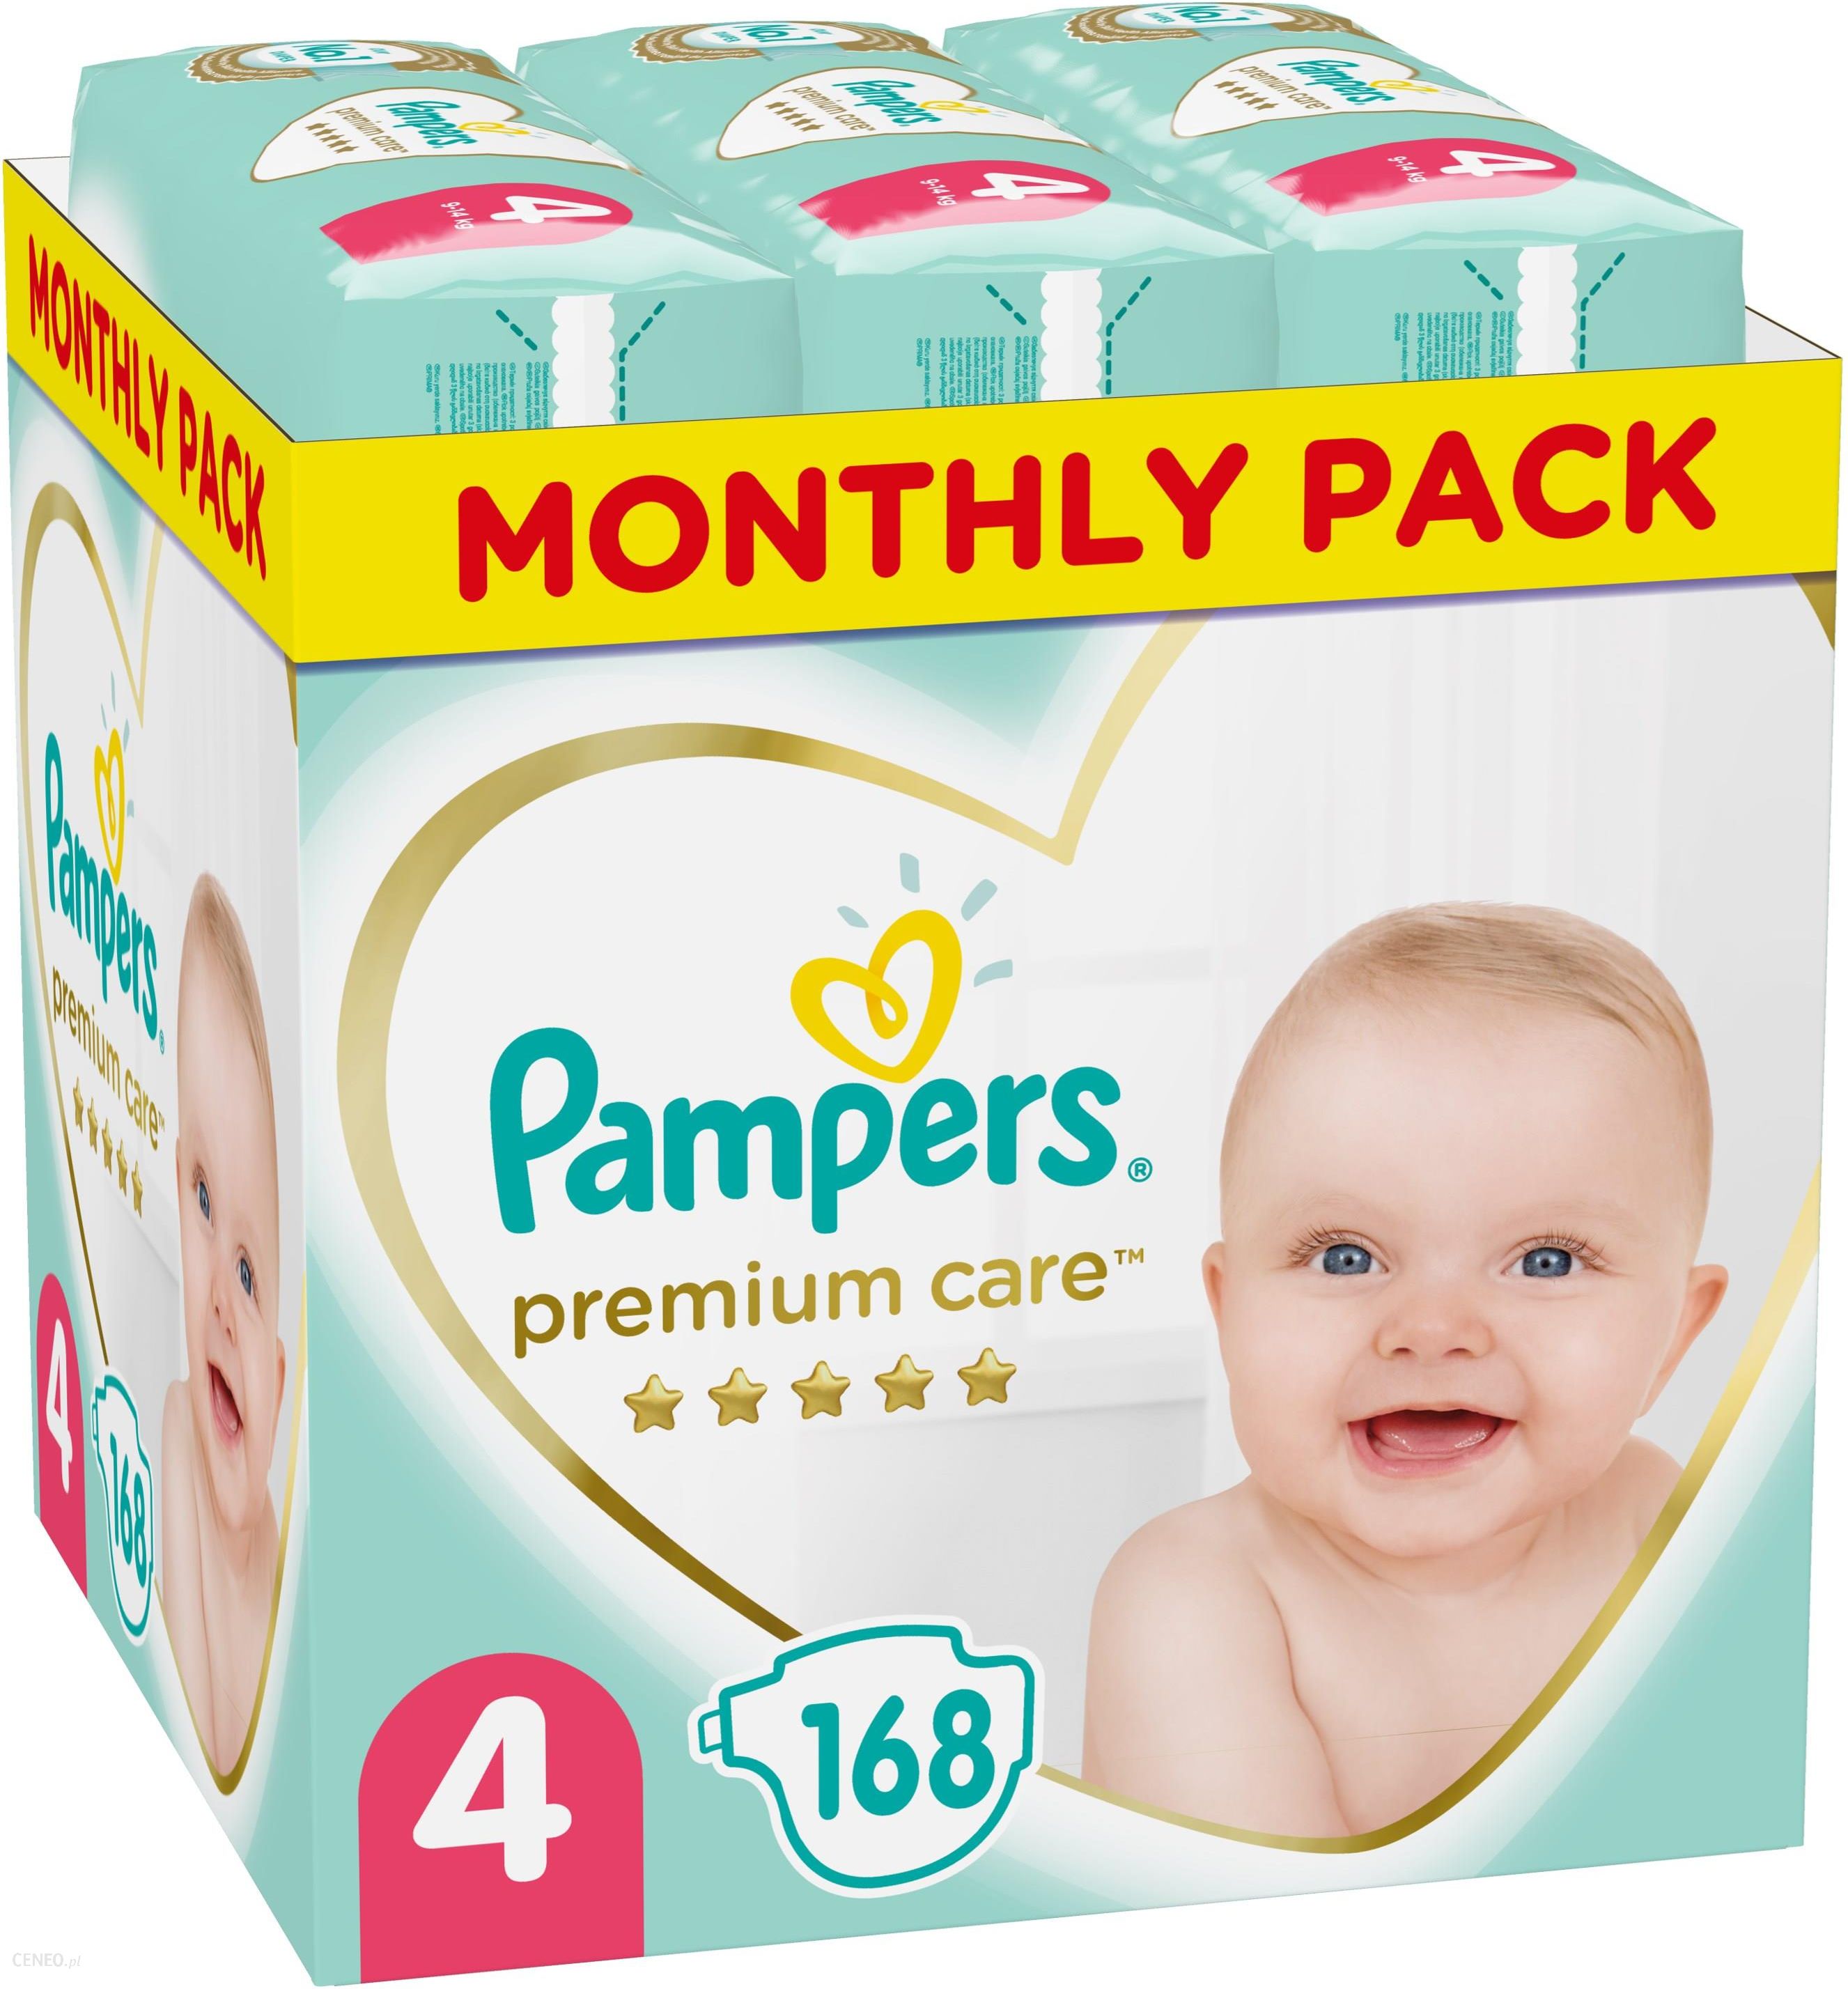 laboo pampers active